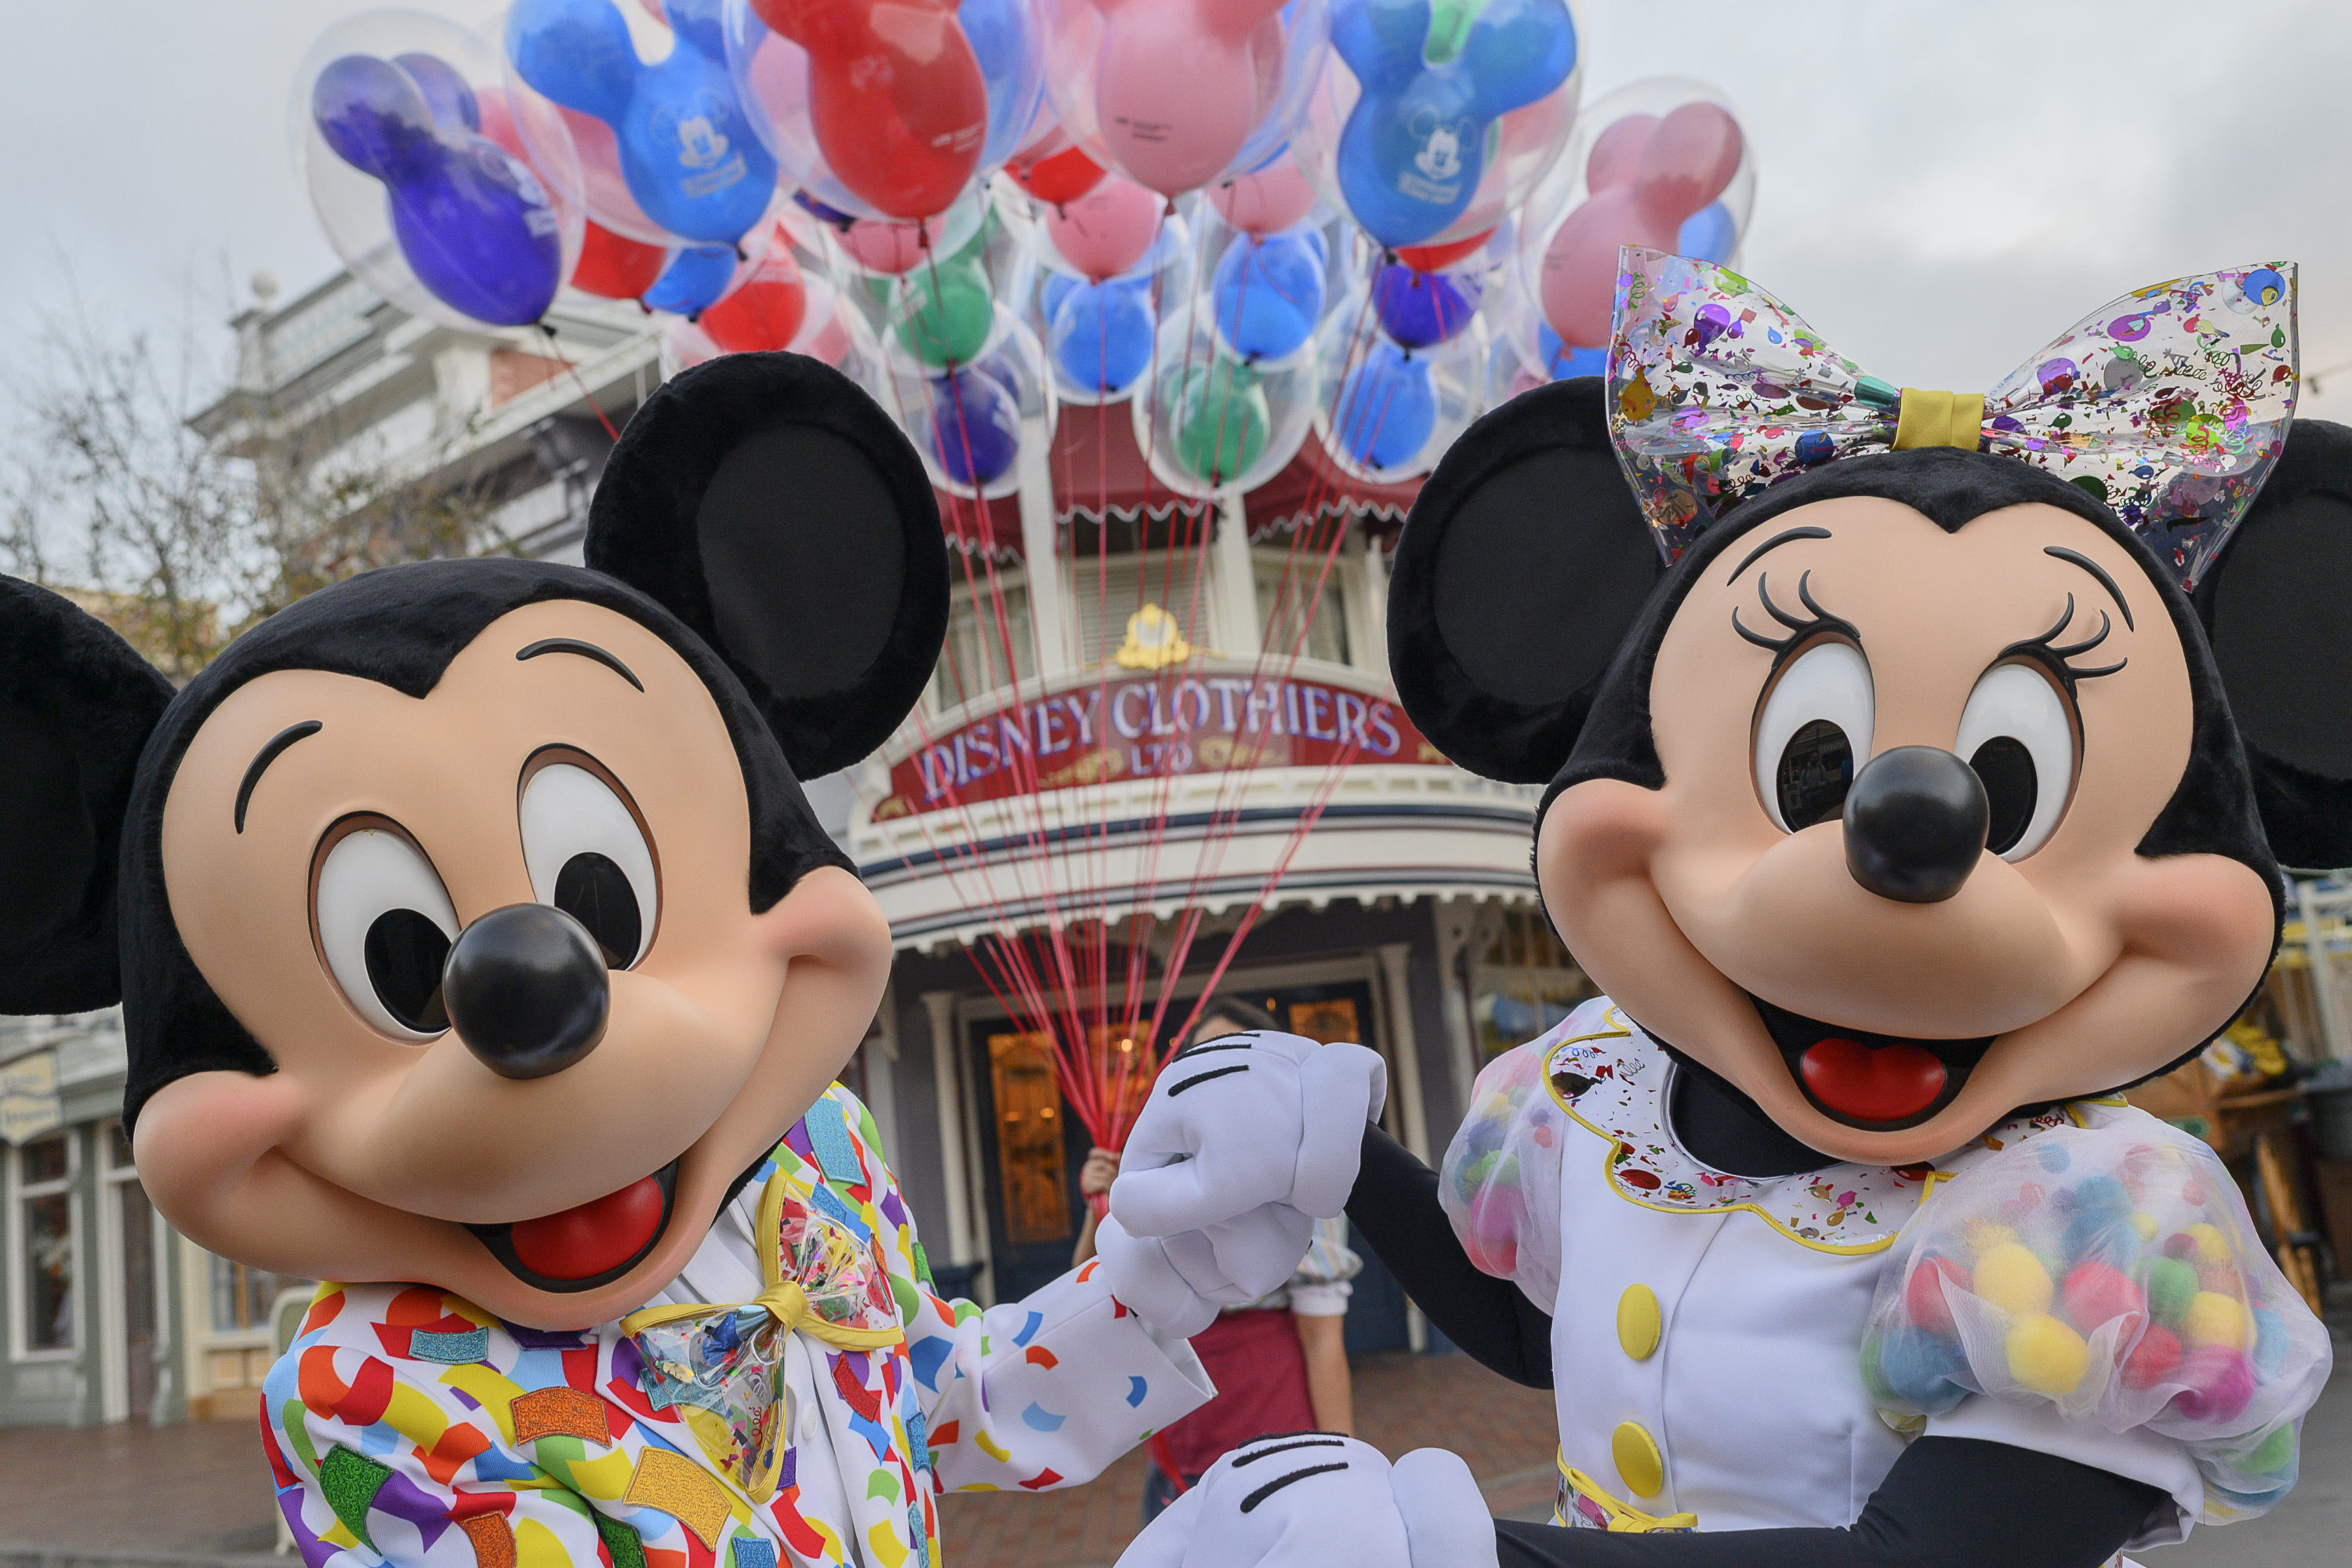 It’s Time to Celebrate the Leader of the Club at Disneyland with Get Your Ears On – A Mickey and Minnie Celebration